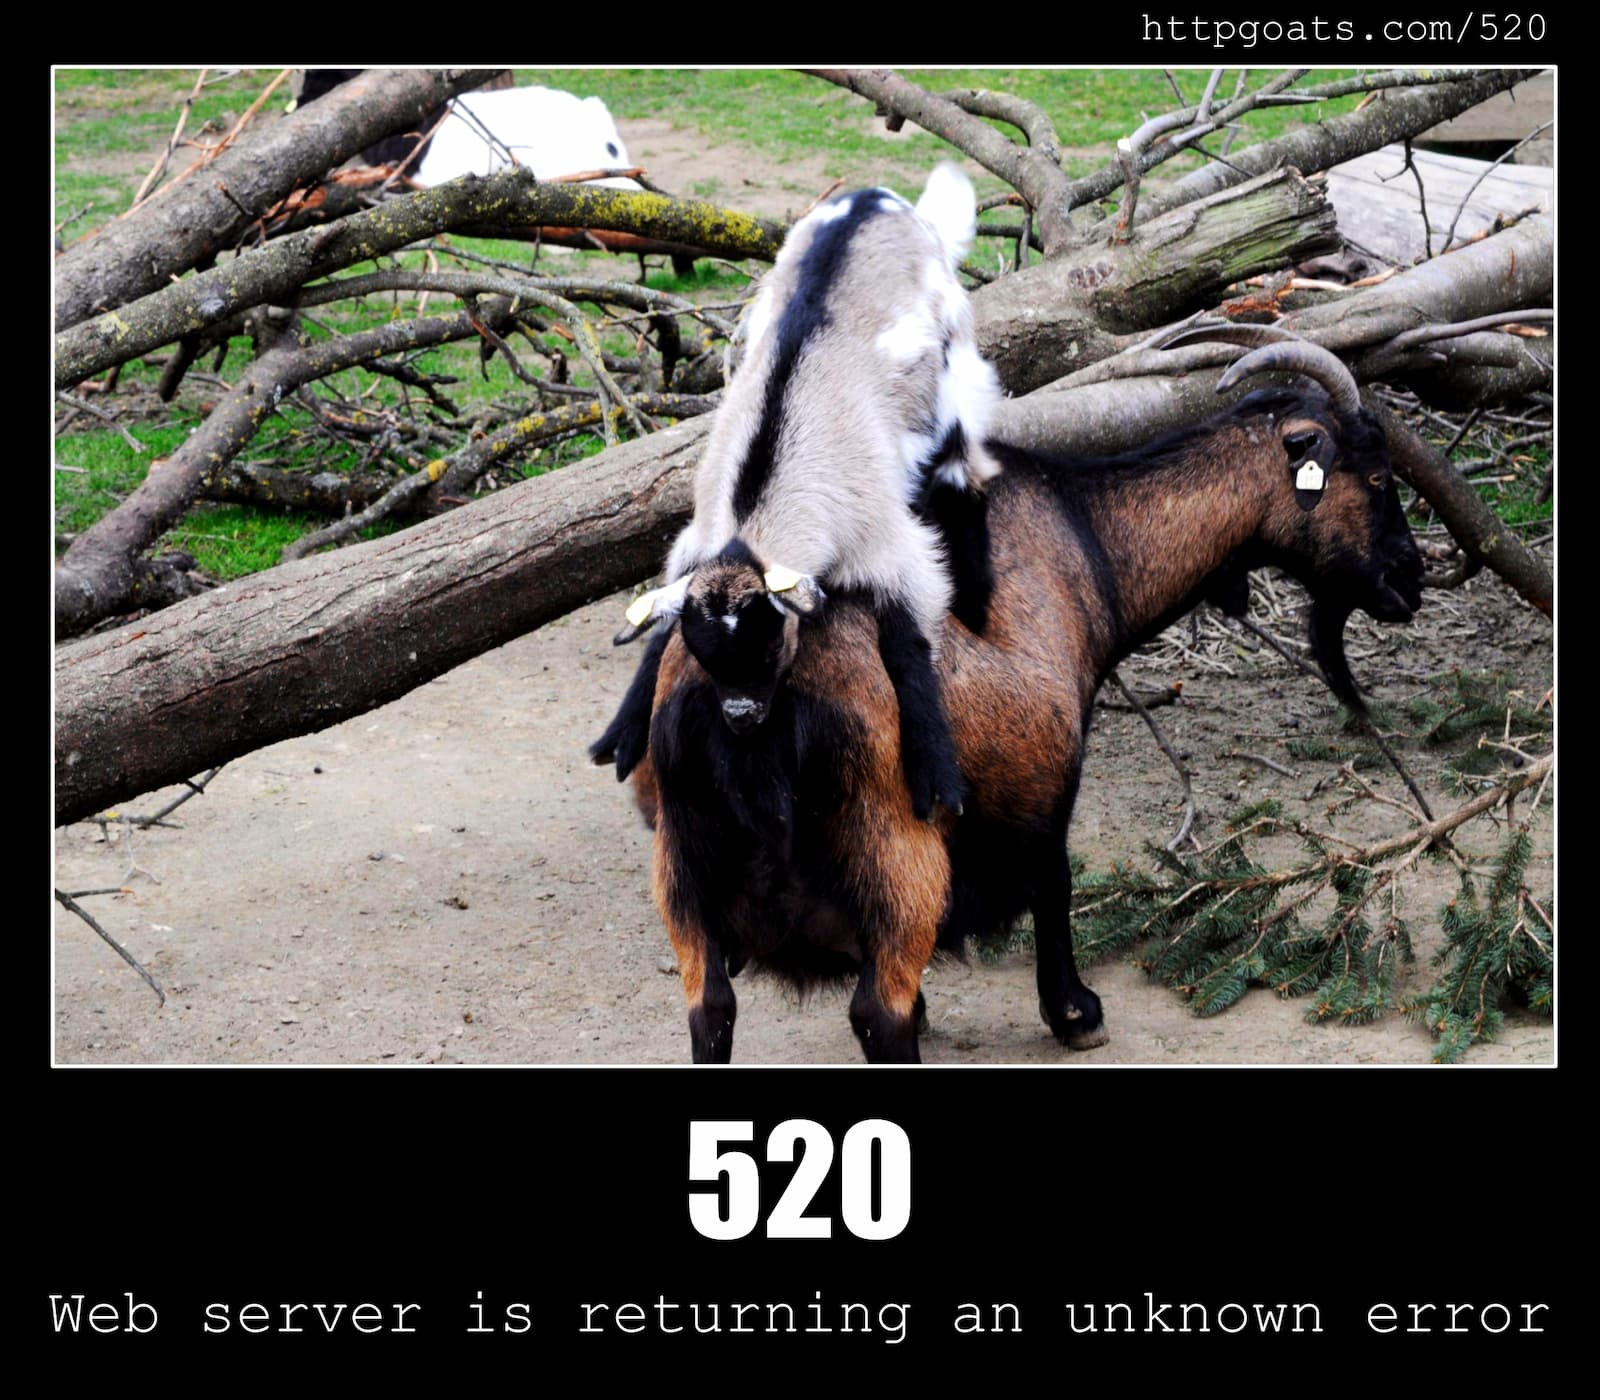 HTTP Status Code 520 Web server is returning an unknown error & Goats